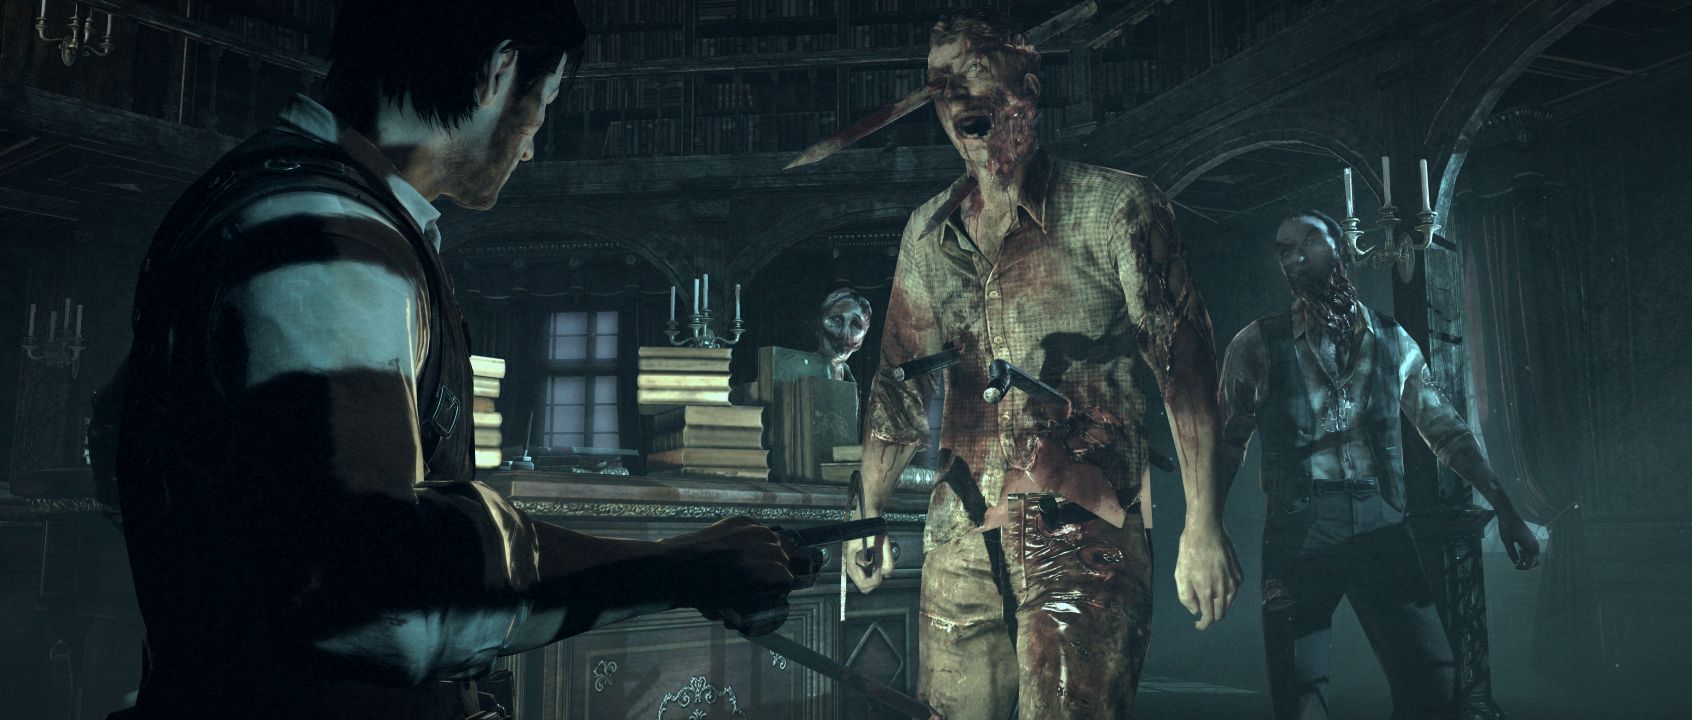 The Evil Within PS4 Screenshots - Image #15876 | New Game Network